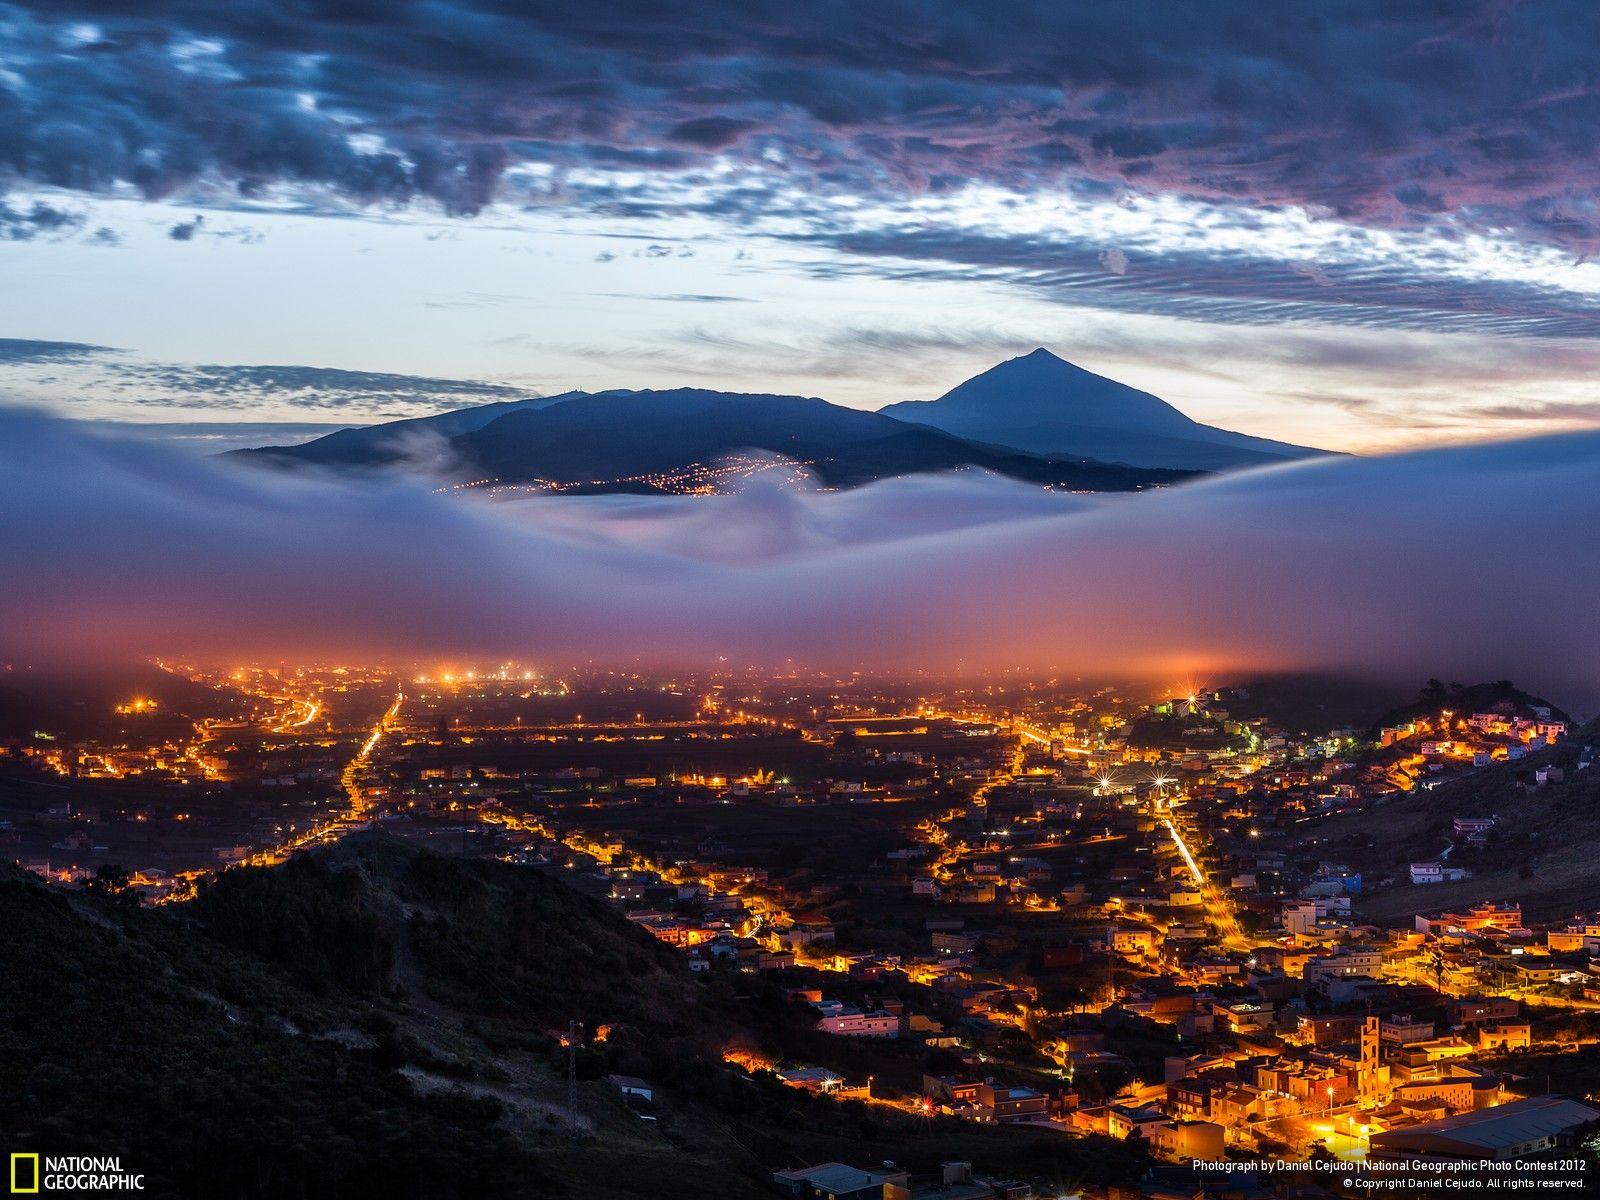 Clouds of Tenerife by daniel cejudo. *Awesome 'scapes